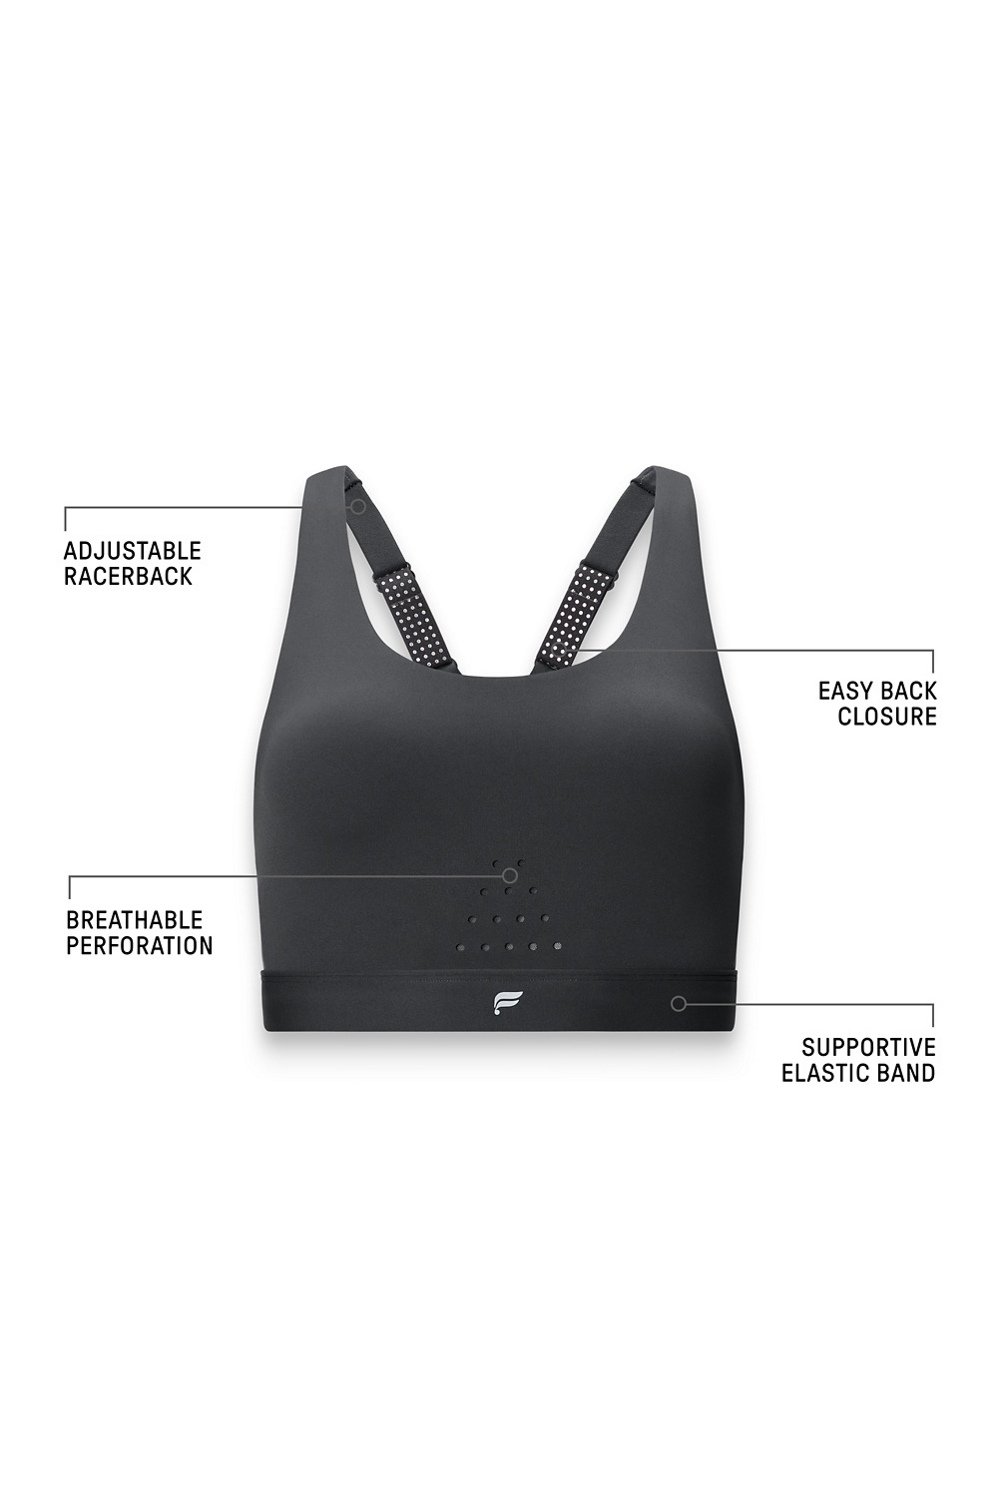 Racerback Sports Bras – Why You Need One - Sports Bras Direct